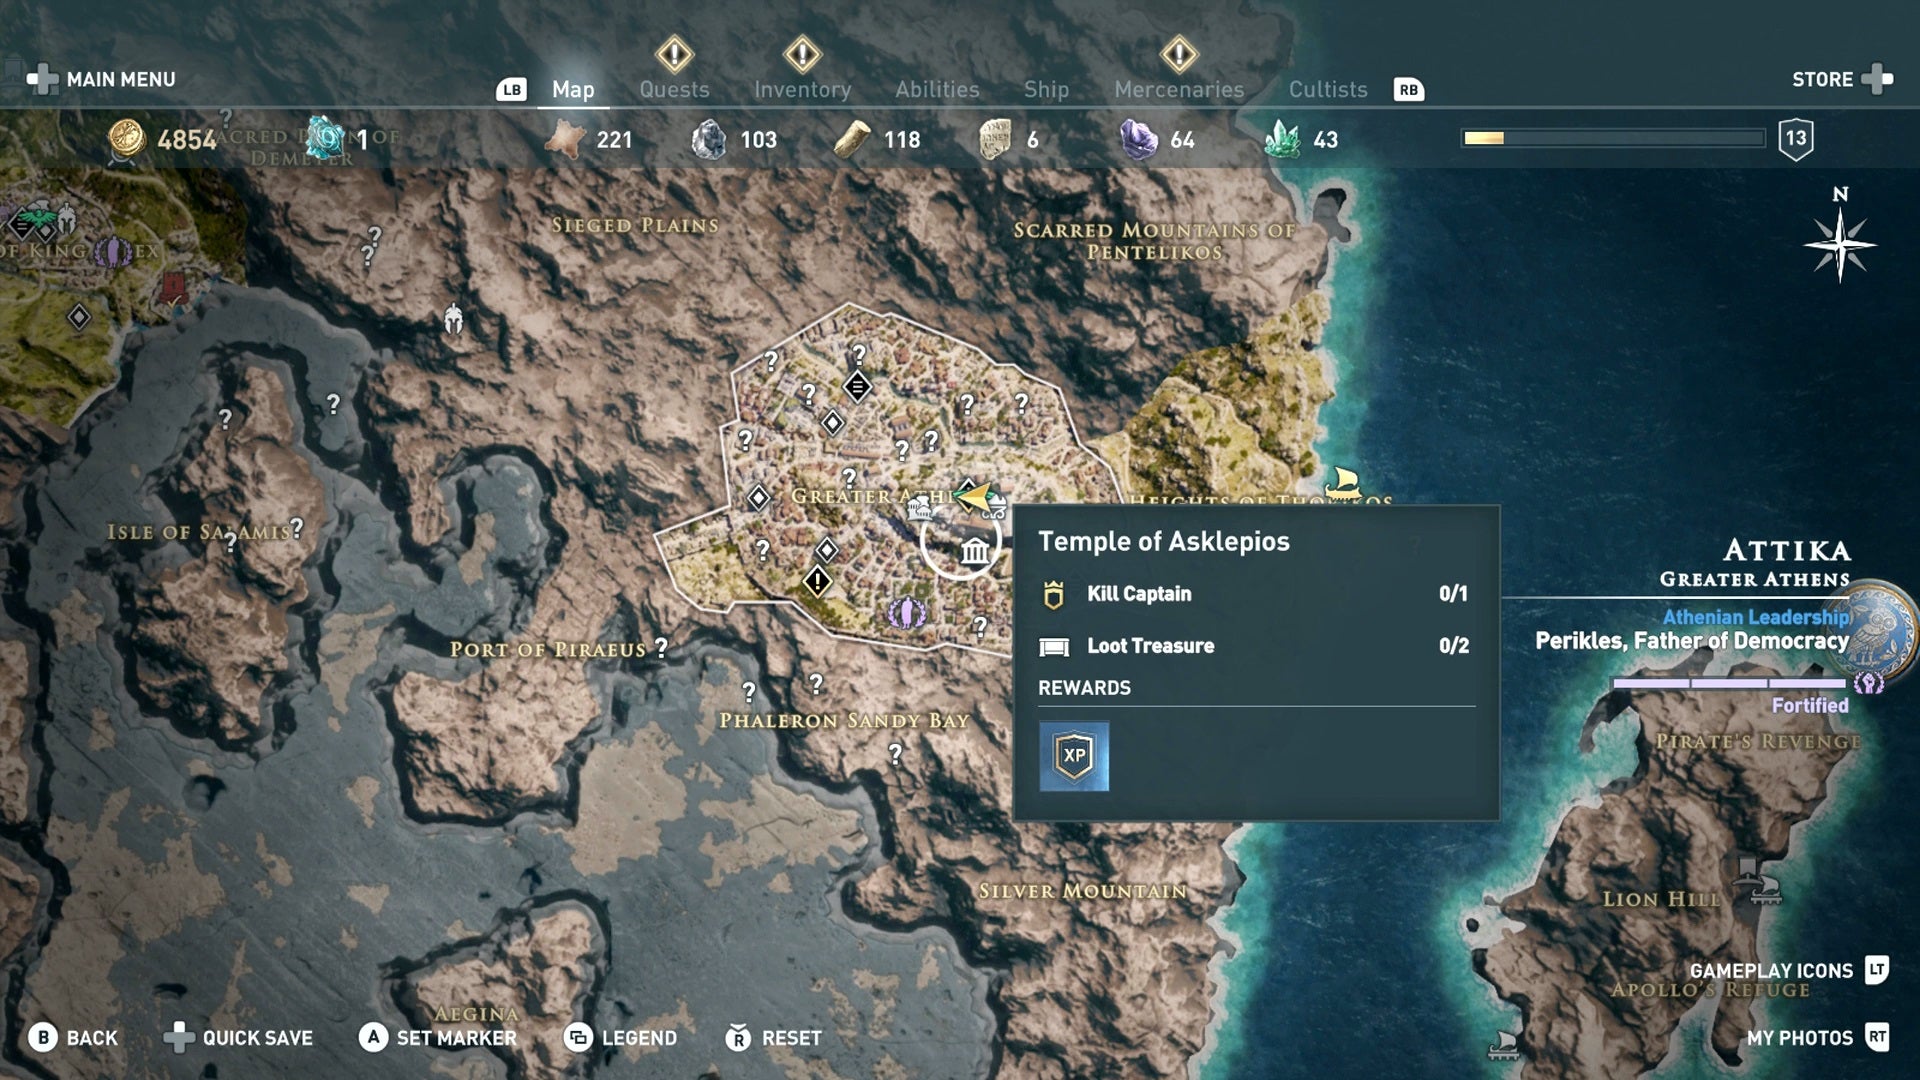 Assassin's Creed Odyssey Attika: how to the side quests | Rock Paper Shotgun